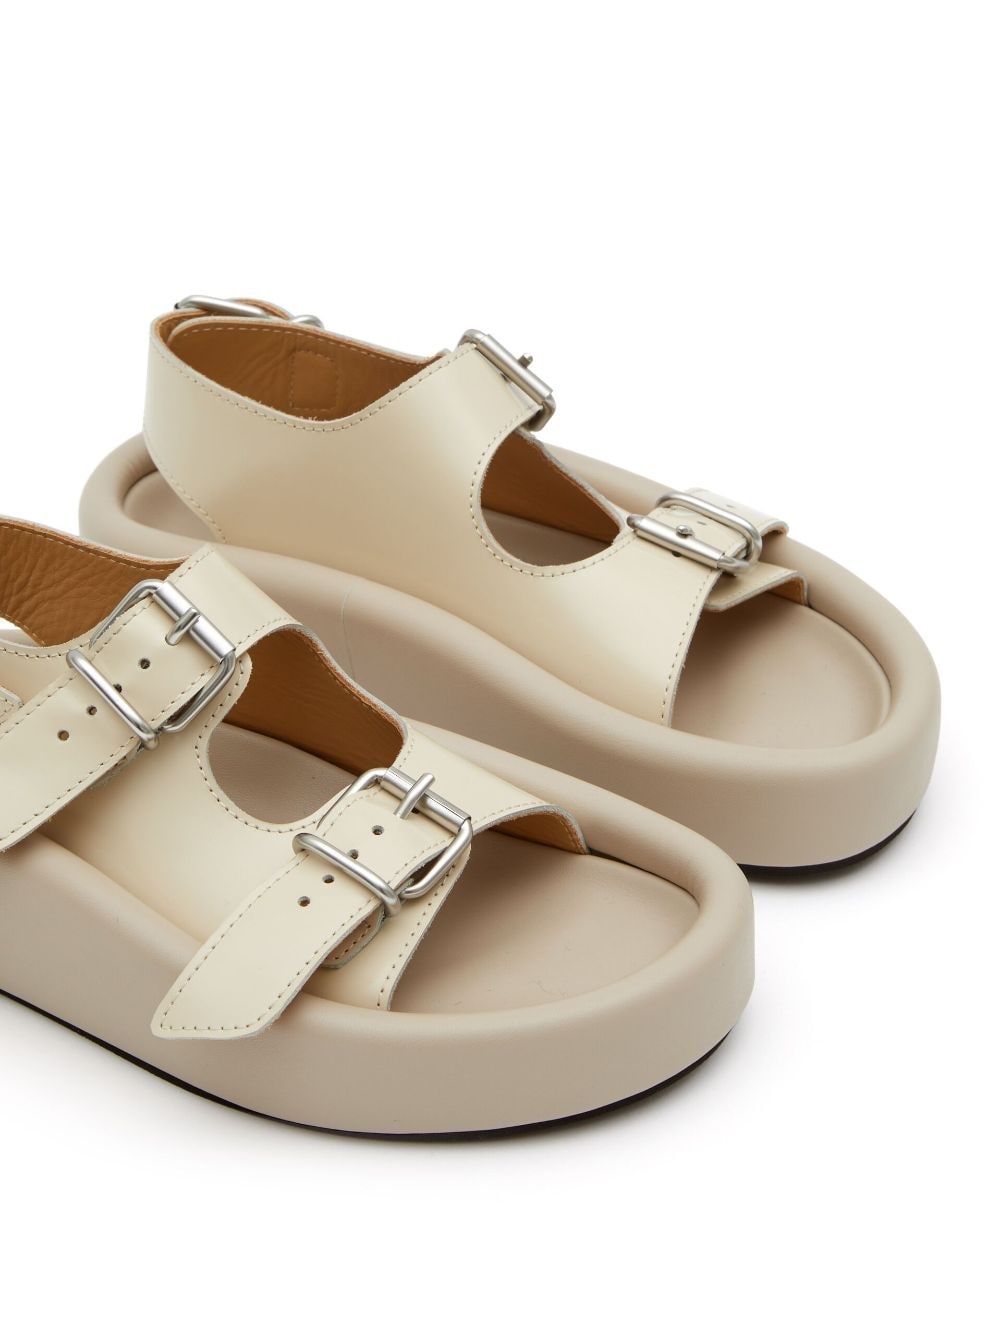 open-toe buckled sandals - 5